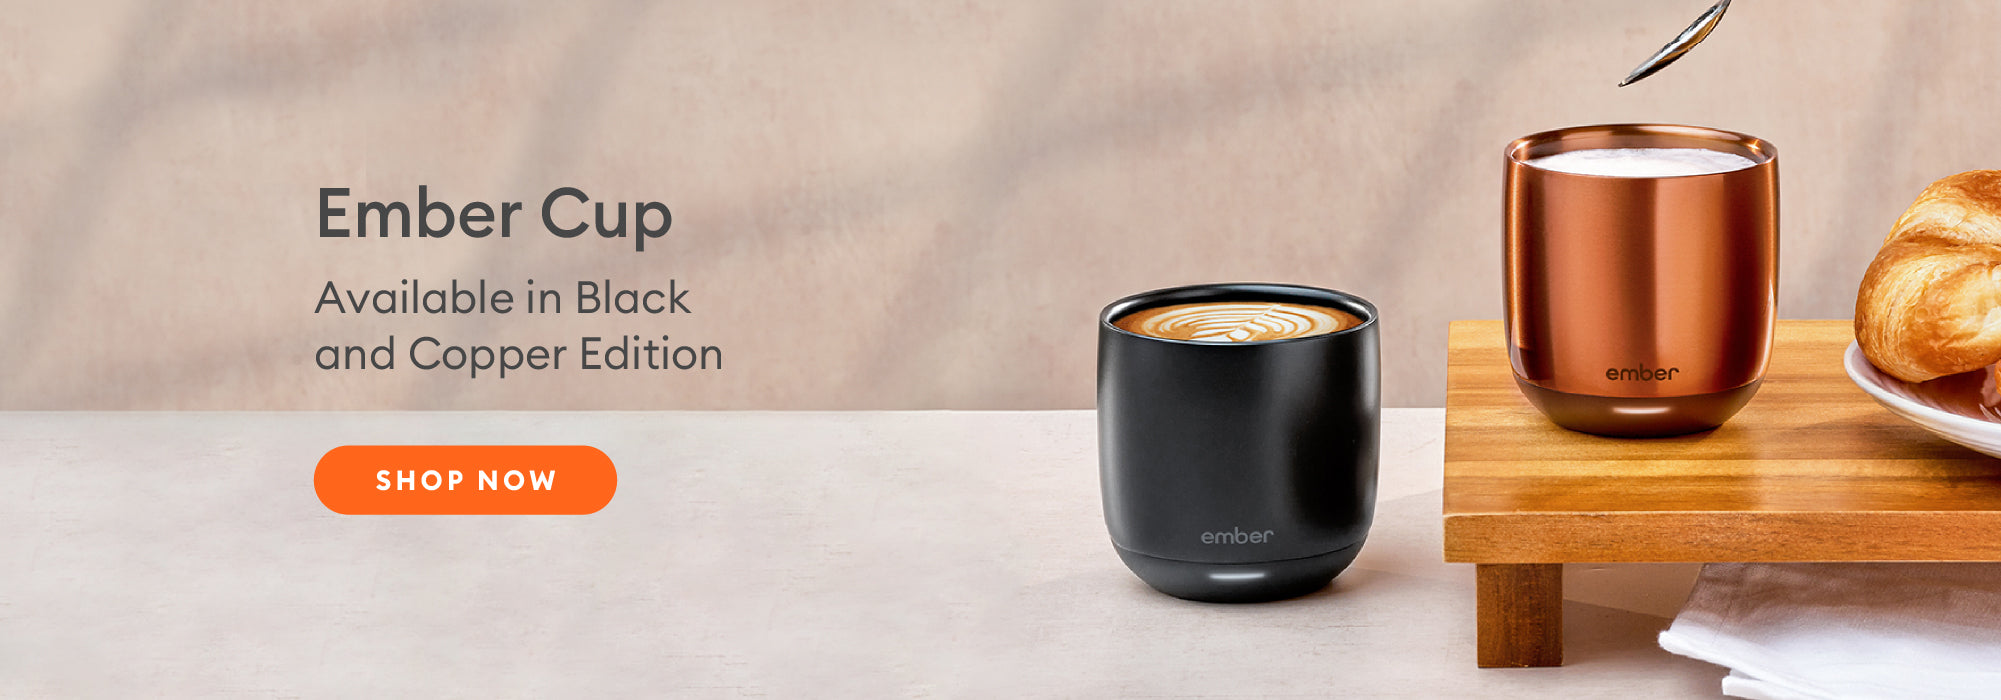 Ember Cup is now available in black and coppper edition